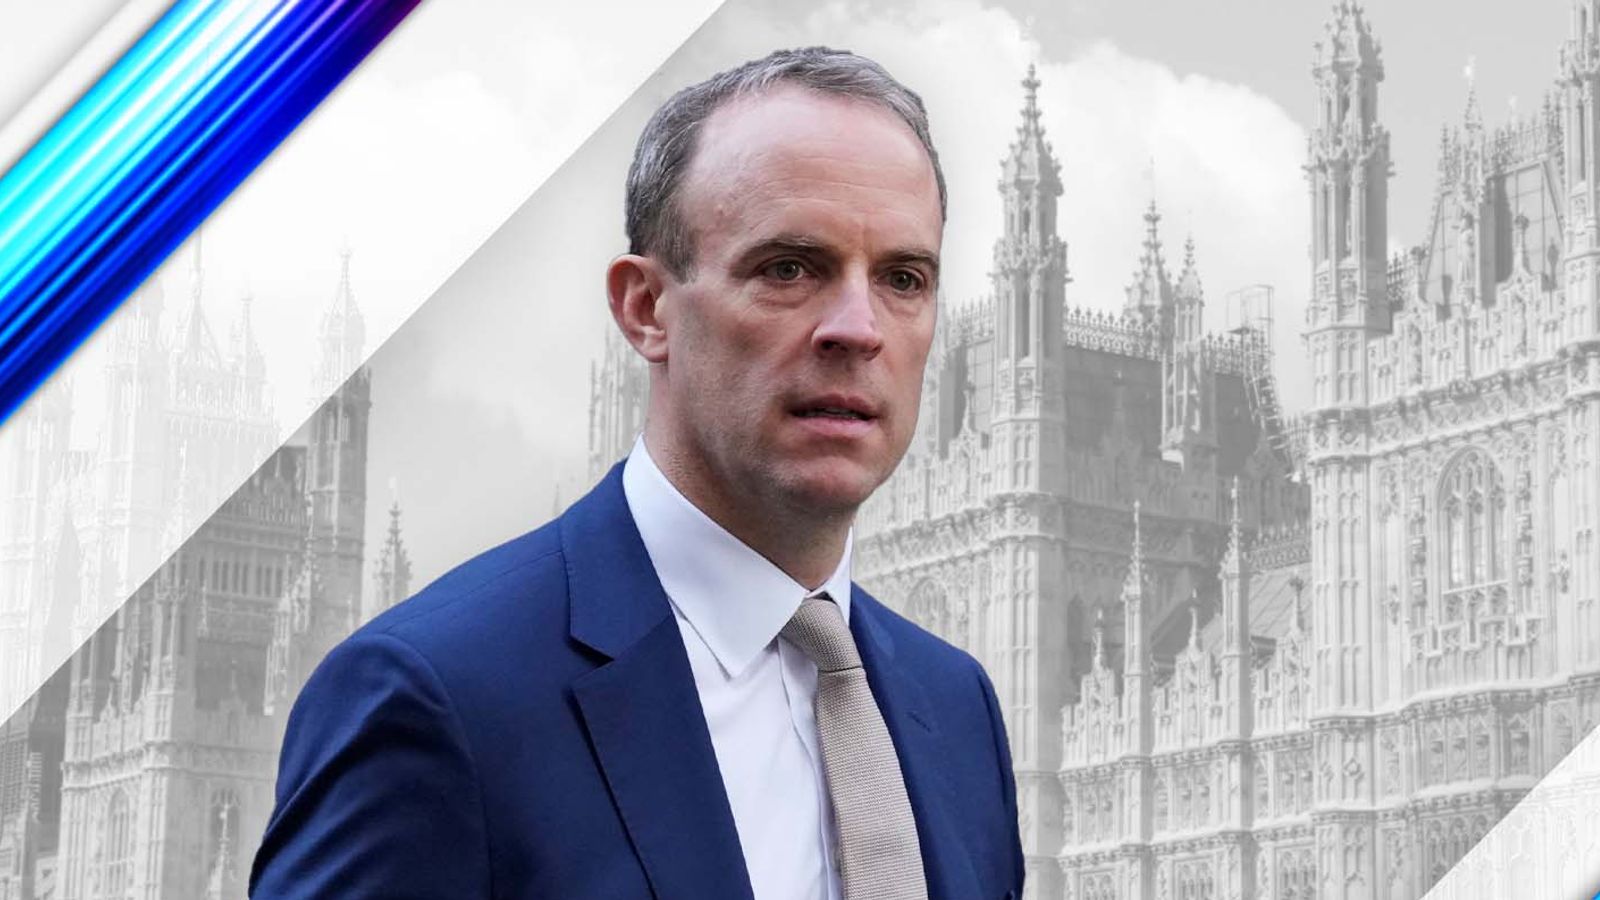 Dominic Raab resigns: The karate black belt MP who briefly ran the country but was brought down by bullying claims